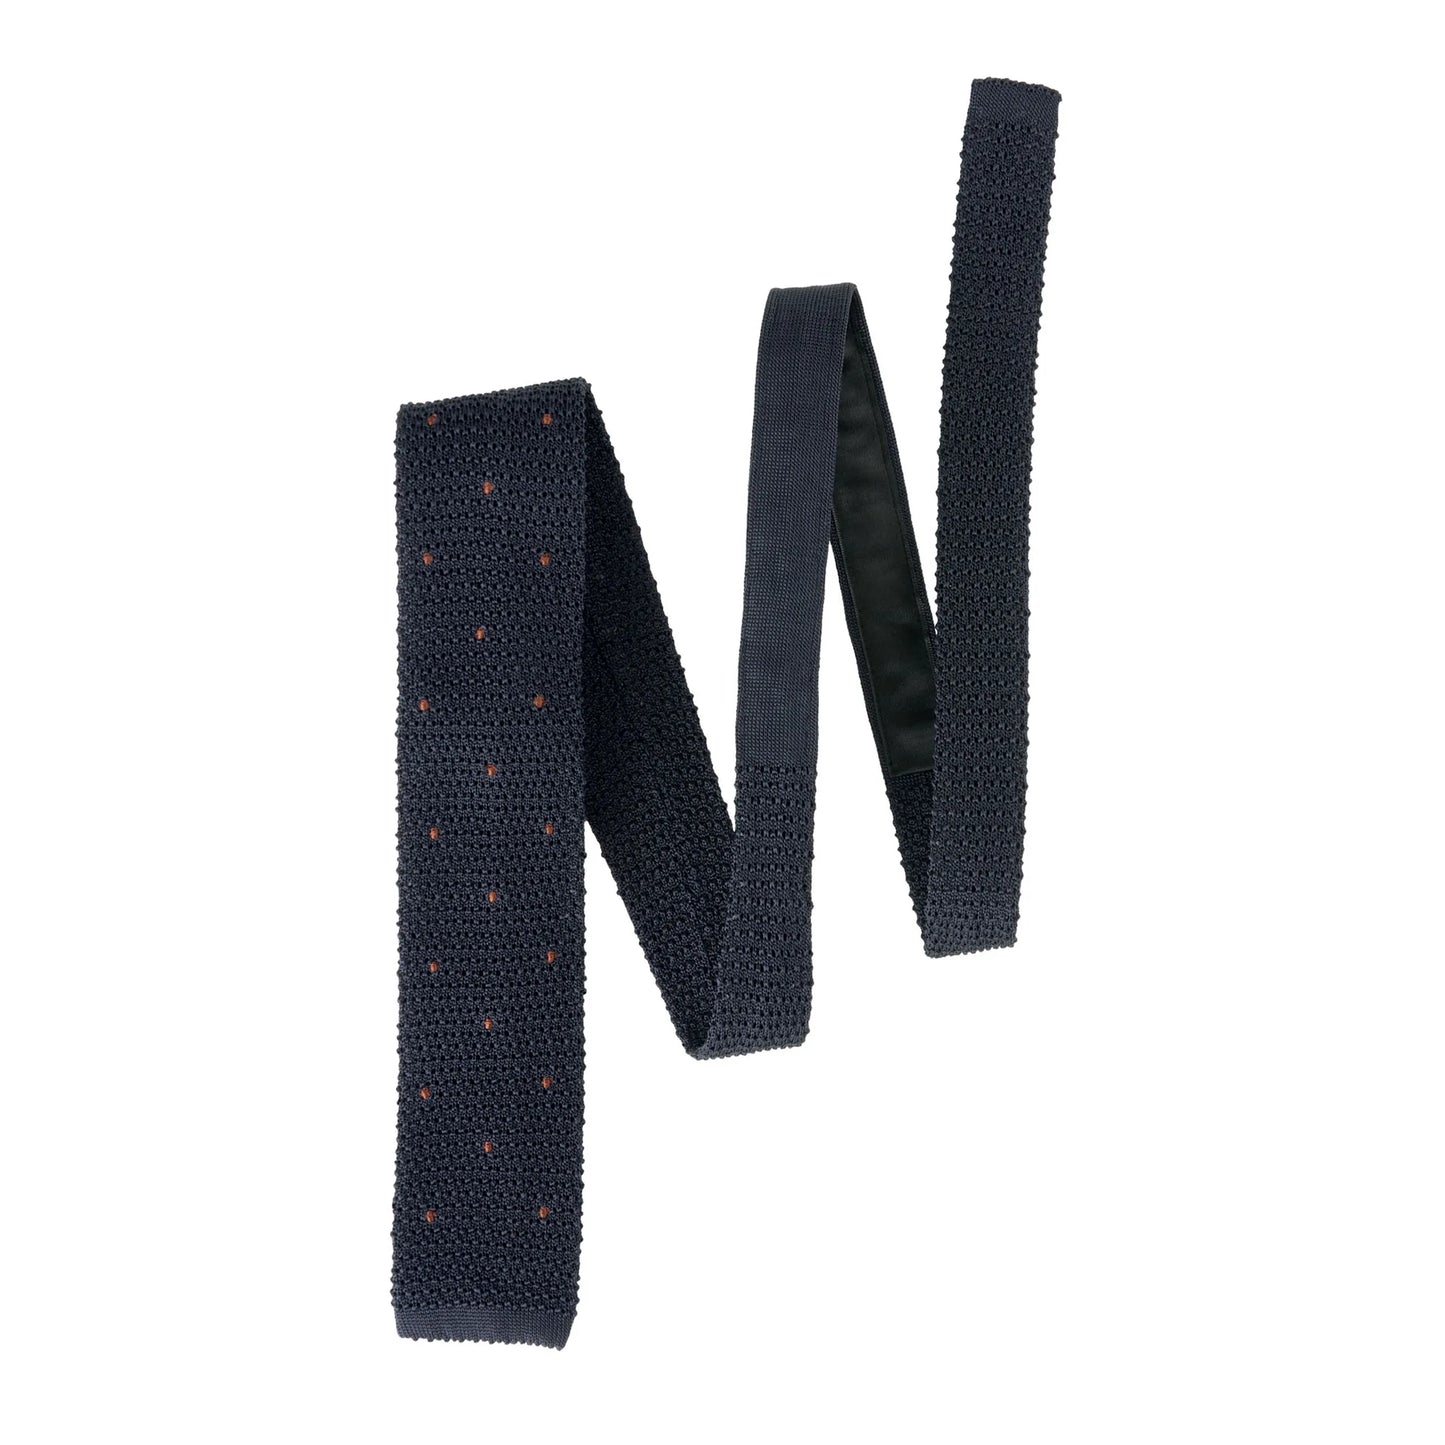 Polka Dot Knitted Silk Tie in Dark Blue and Brown